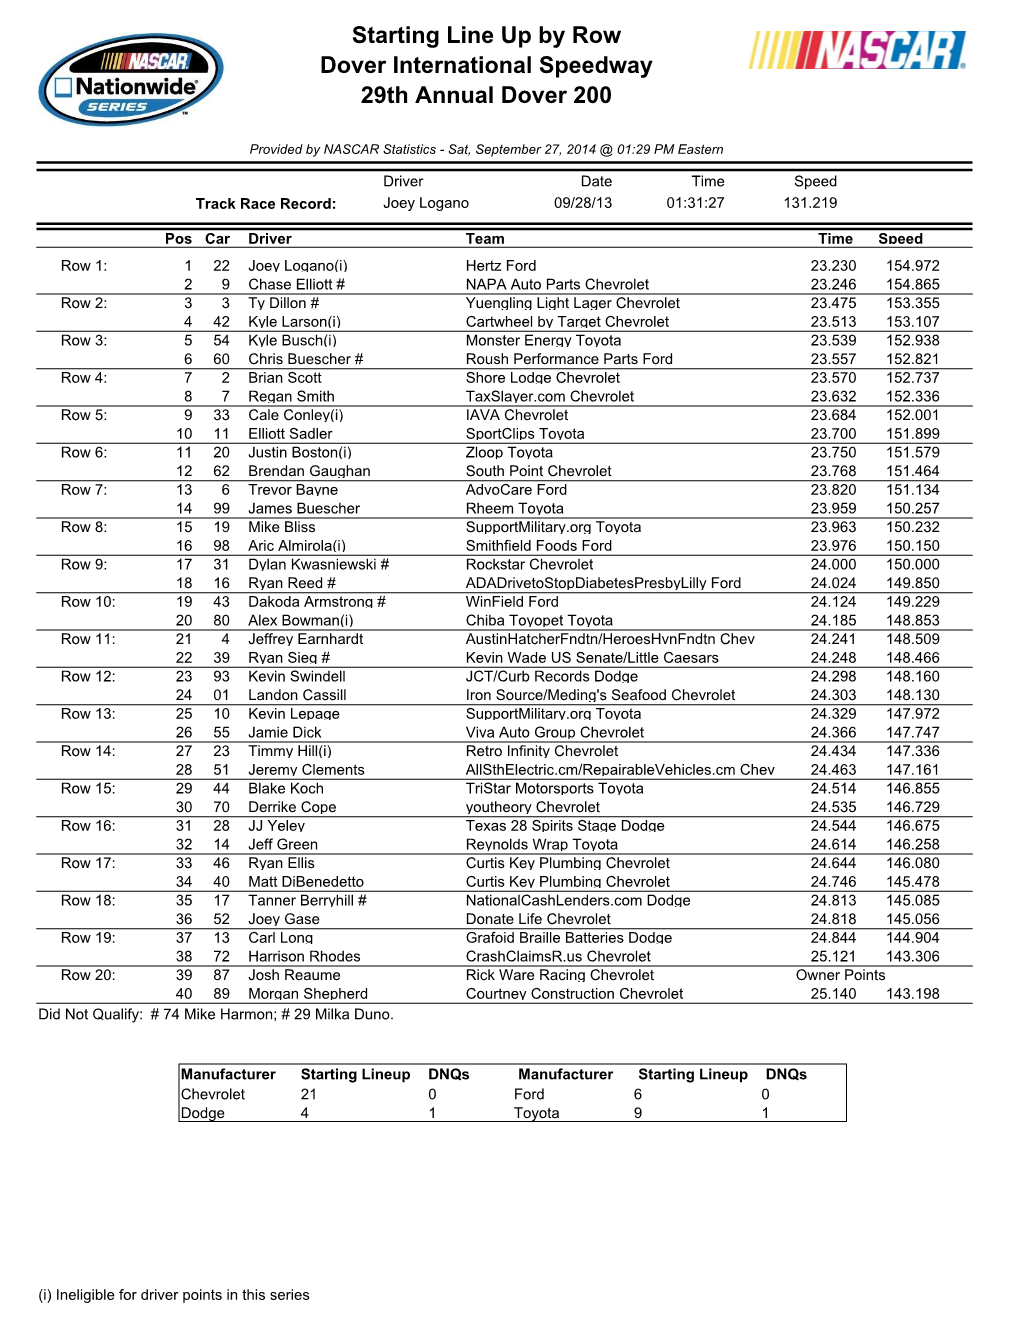 Starting Line up by Row Dover International Speedway 29Th Annual Dover 200